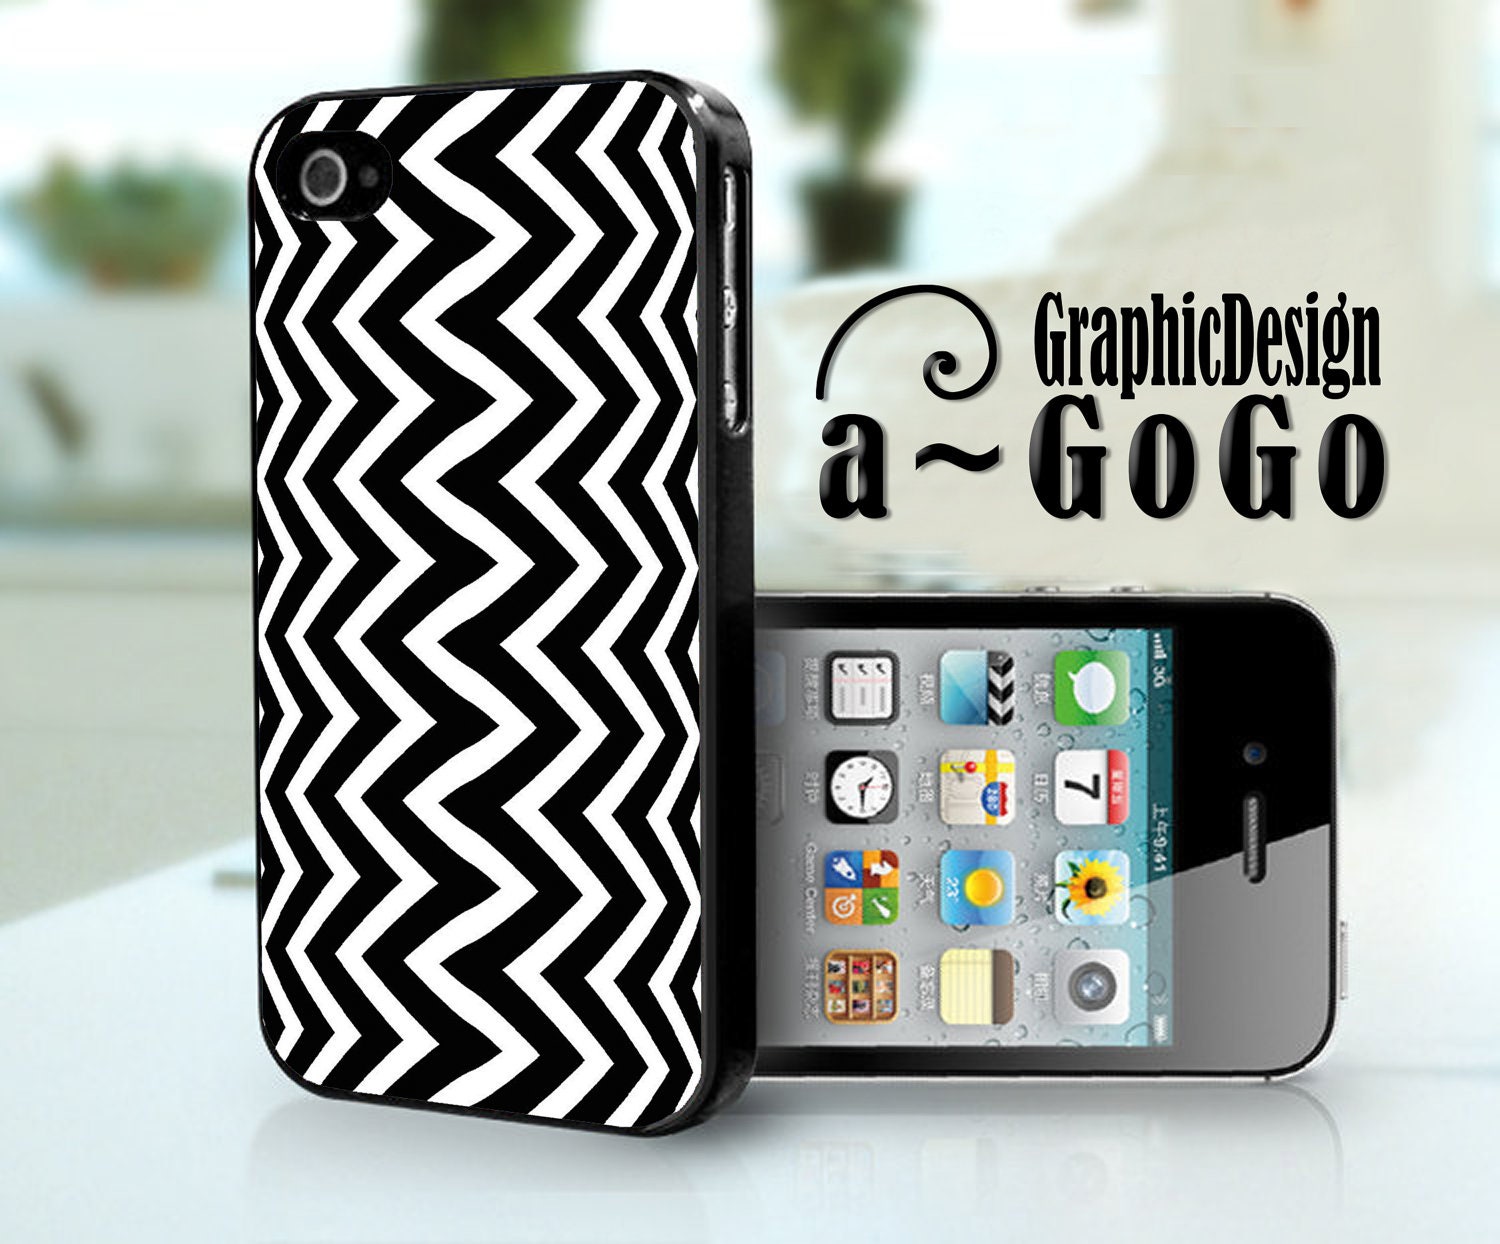 Iphone 4s Black And White Case